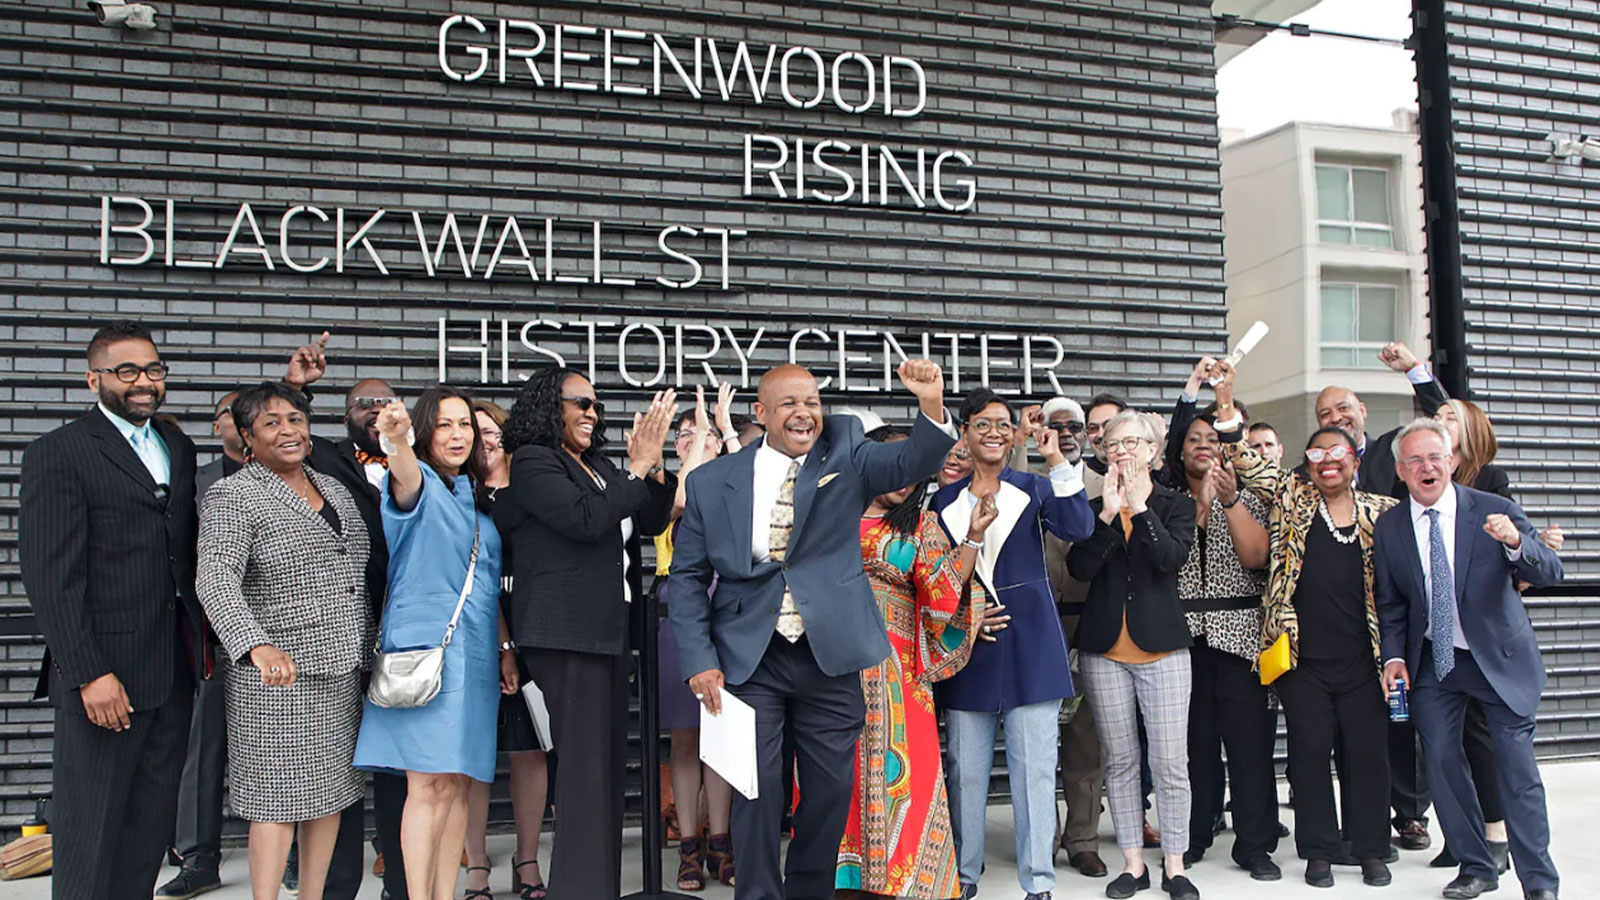 Members of the 1921 Tulsa Race Massacre Centennial Commission, with State Sen. Kevin Matthews in front, cheer in front of the Greenwood Rising Black Wall St. History Center before a dedication in June 2021 in Tulsa.